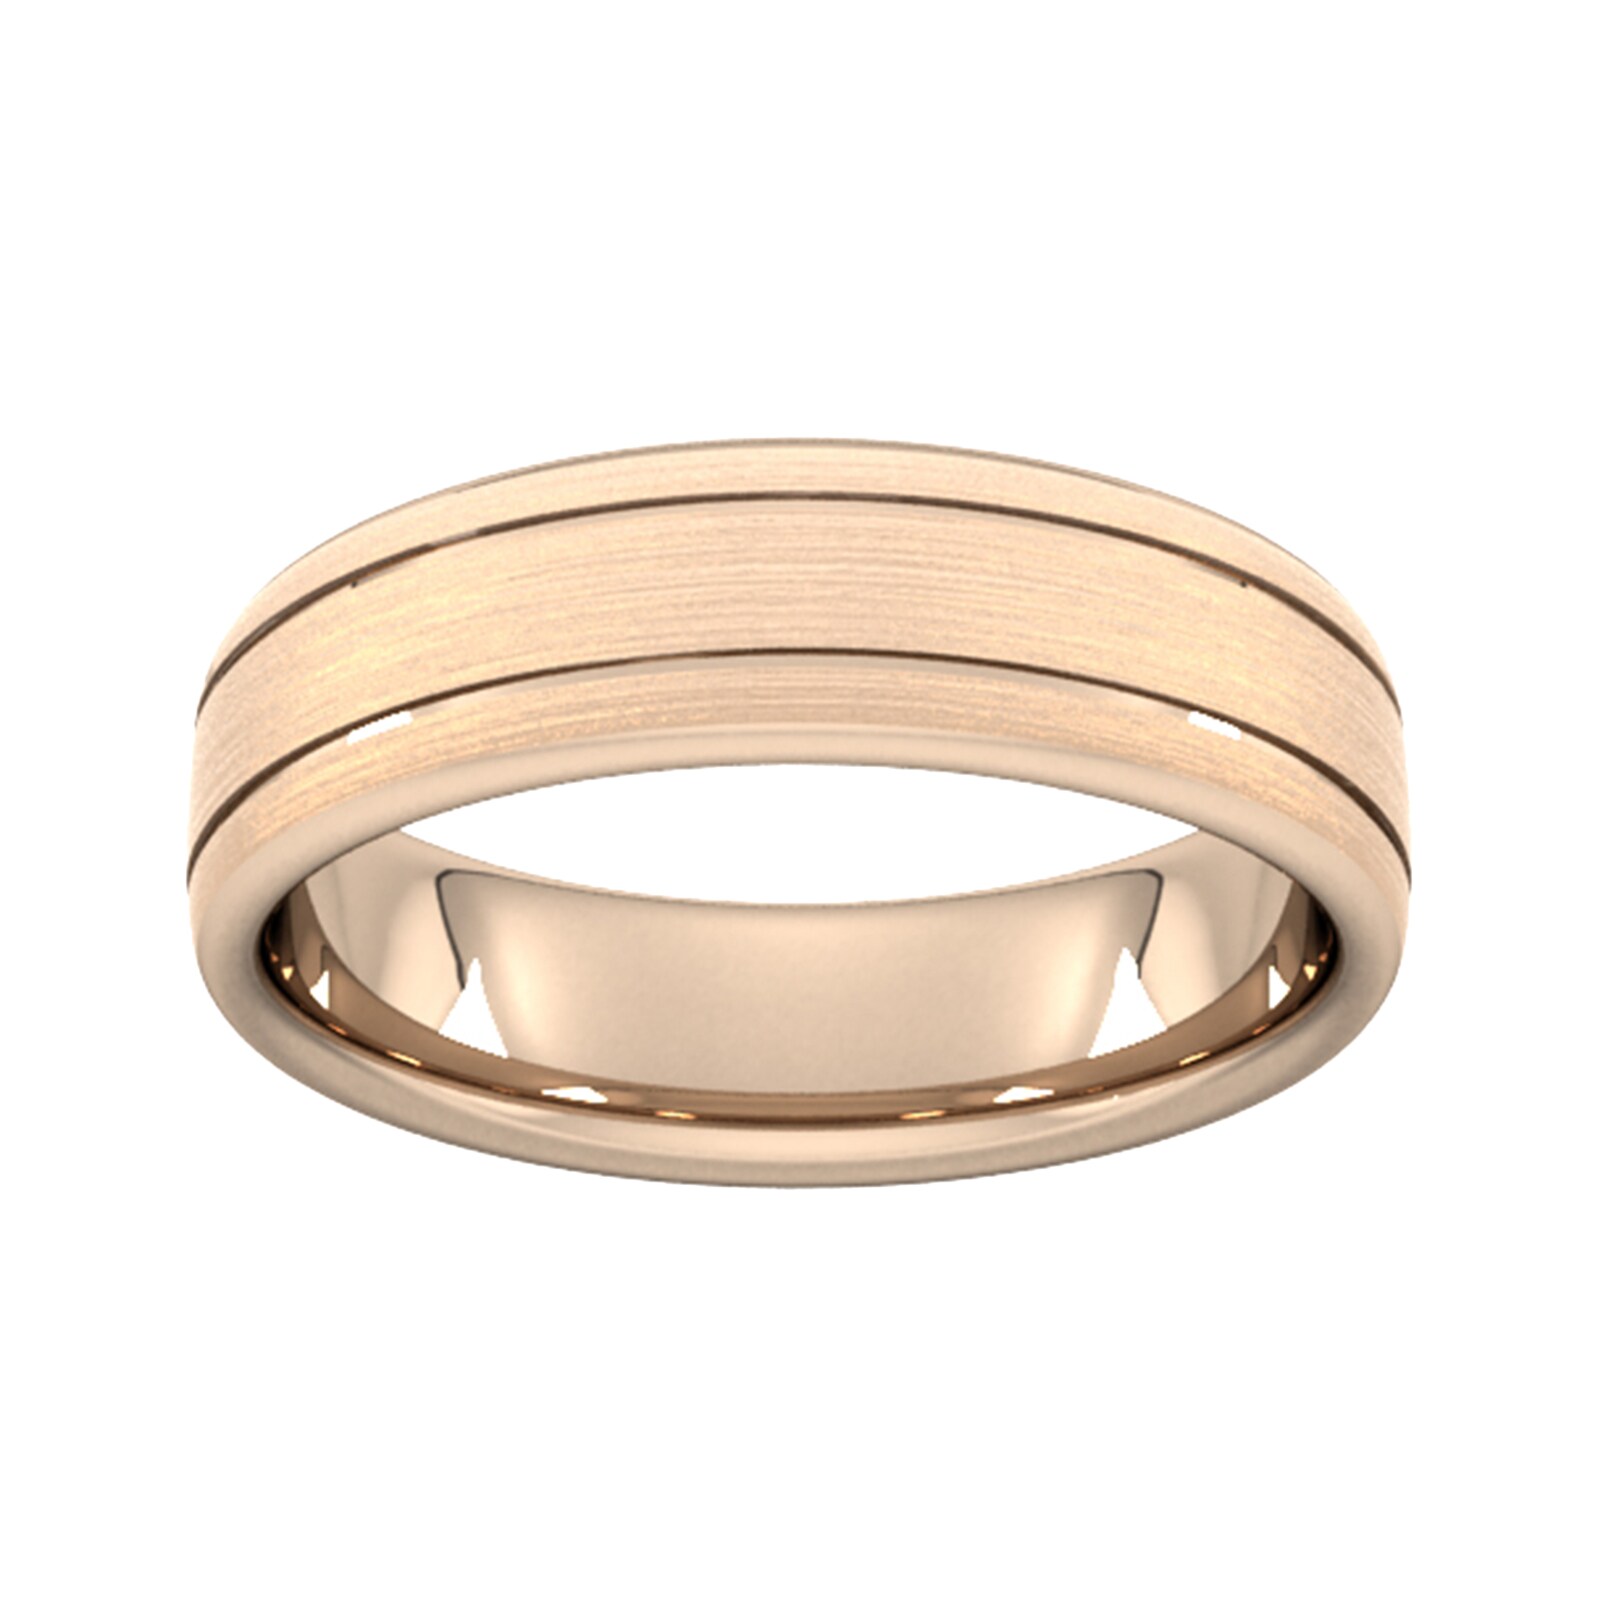 6mm Flat Court Heavy Matt Finish With Double Grooves Wedding Ring In 9 Carat Rose Gold - Ring Size M